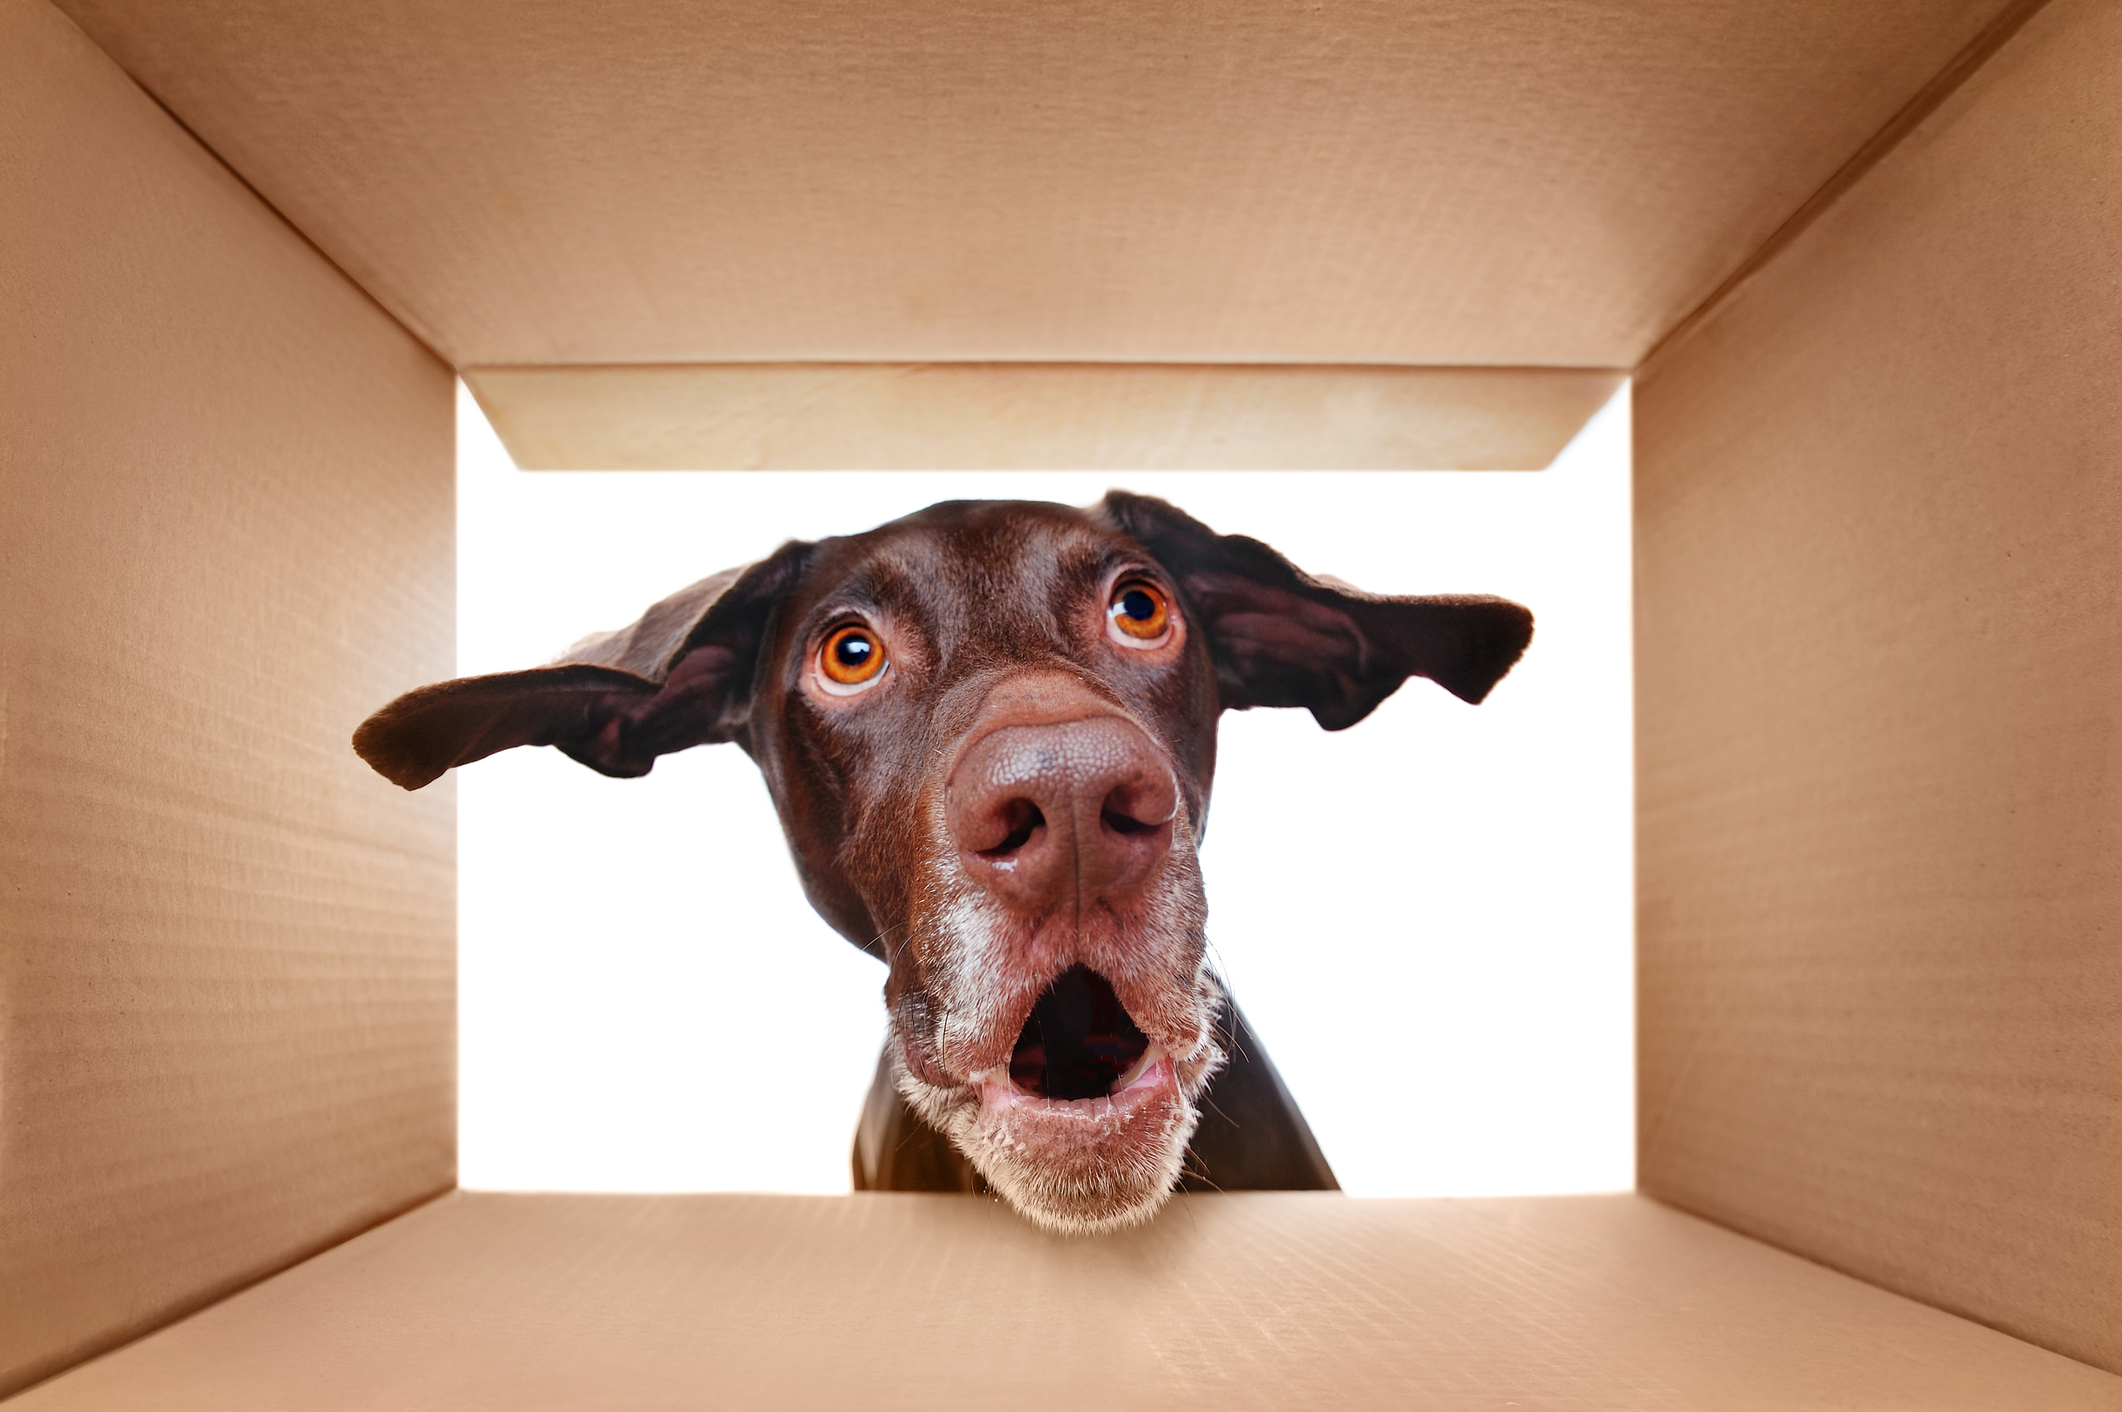 Tips for successfully moving your pets into a new home